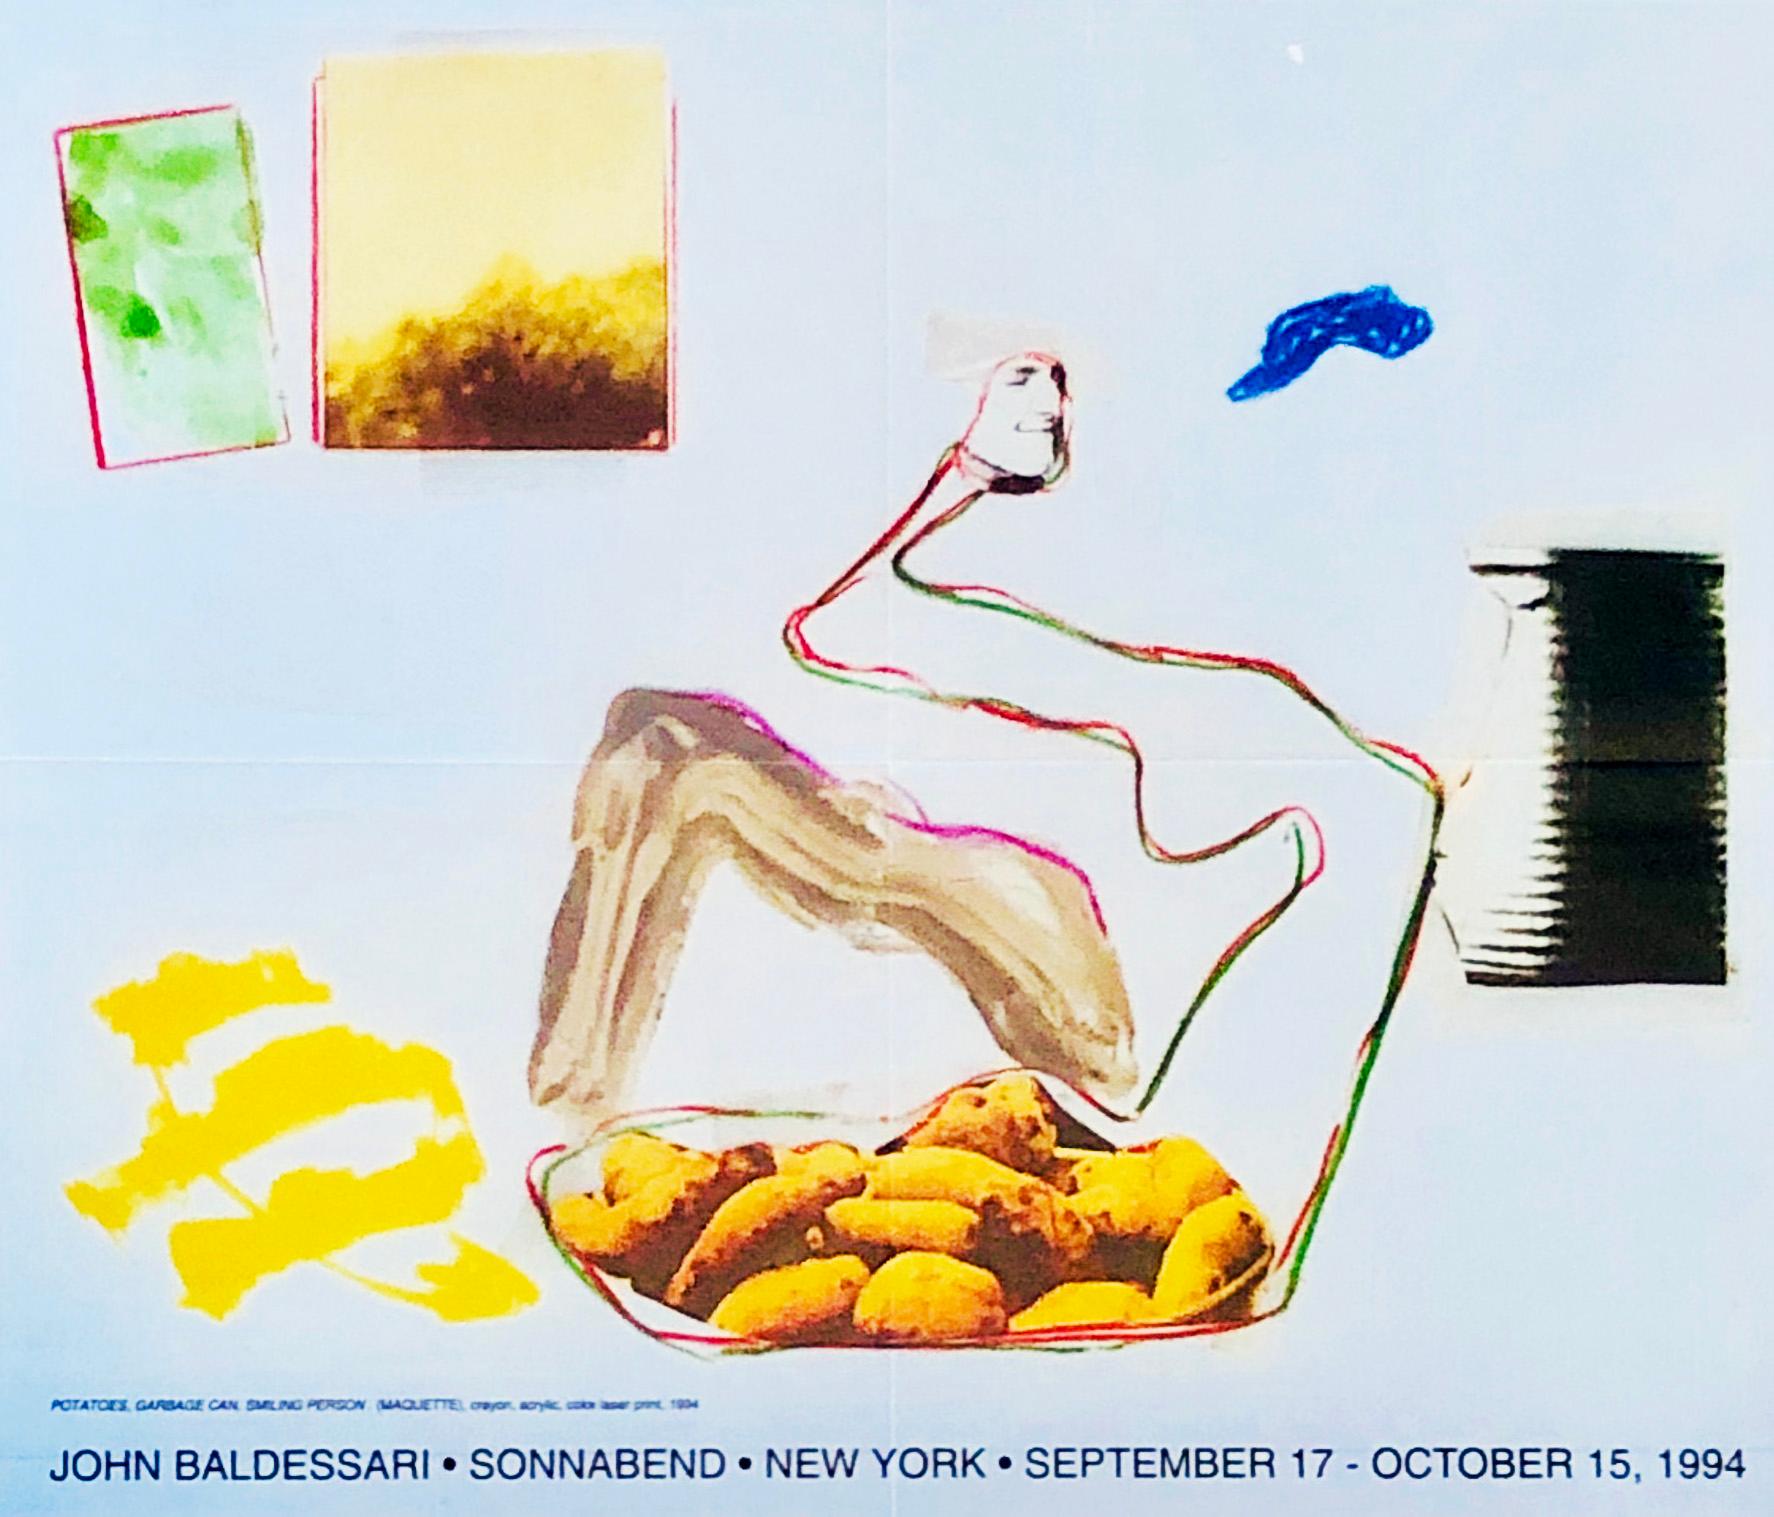 John Baldessari, Sonnabend Gallery. New York, NY, September 17 - October 15, 1994:
A beautifully composed rare original John Baldessari exhibition poster on elegant transparent paper, which would look fantastic framed. Further details as follows: